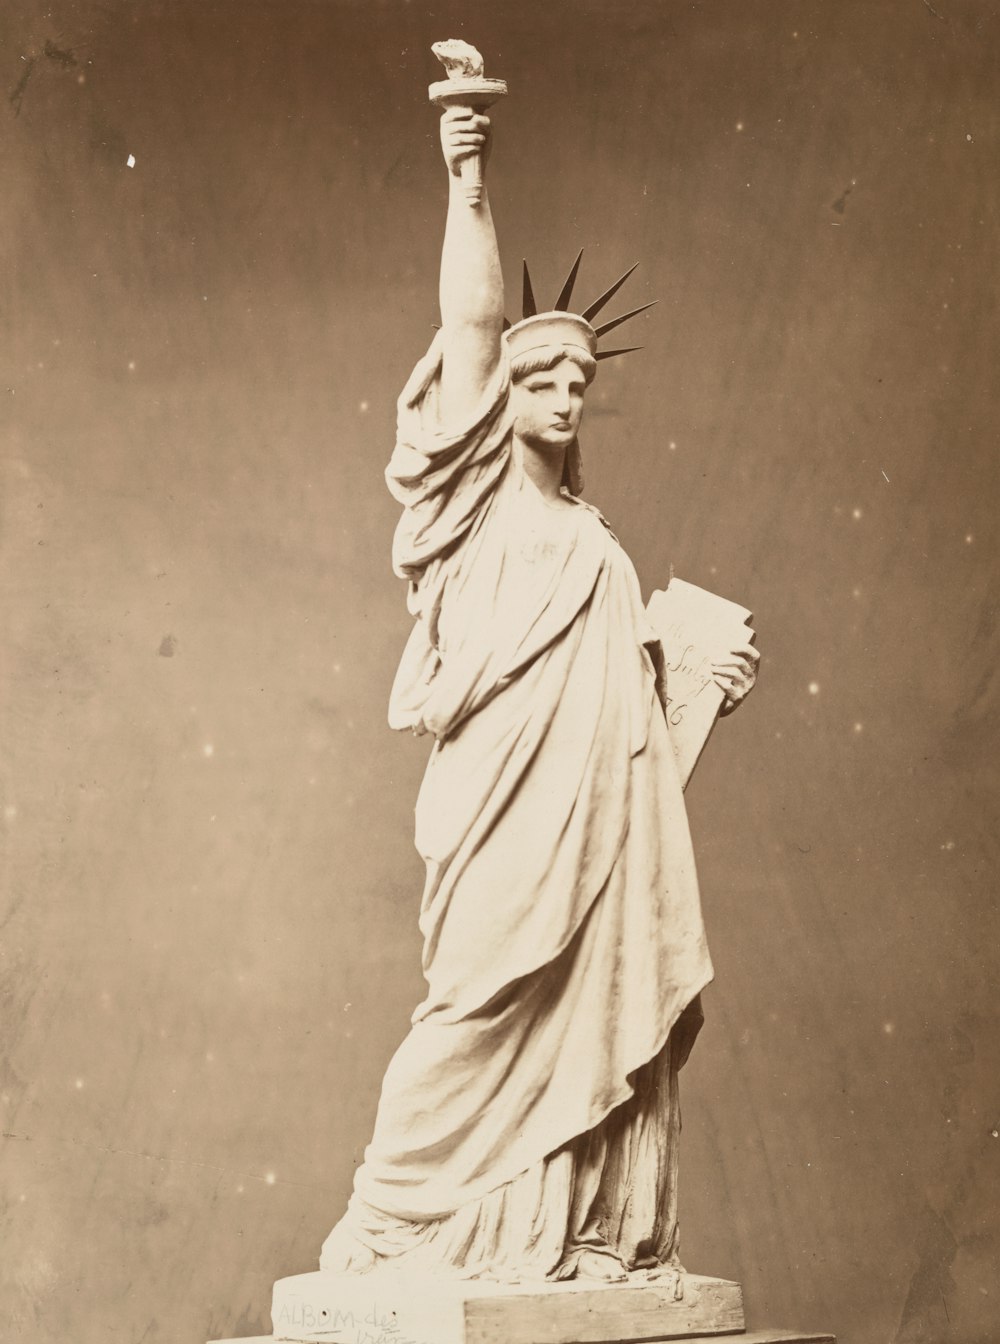 Historical image of the Statue of Liberty